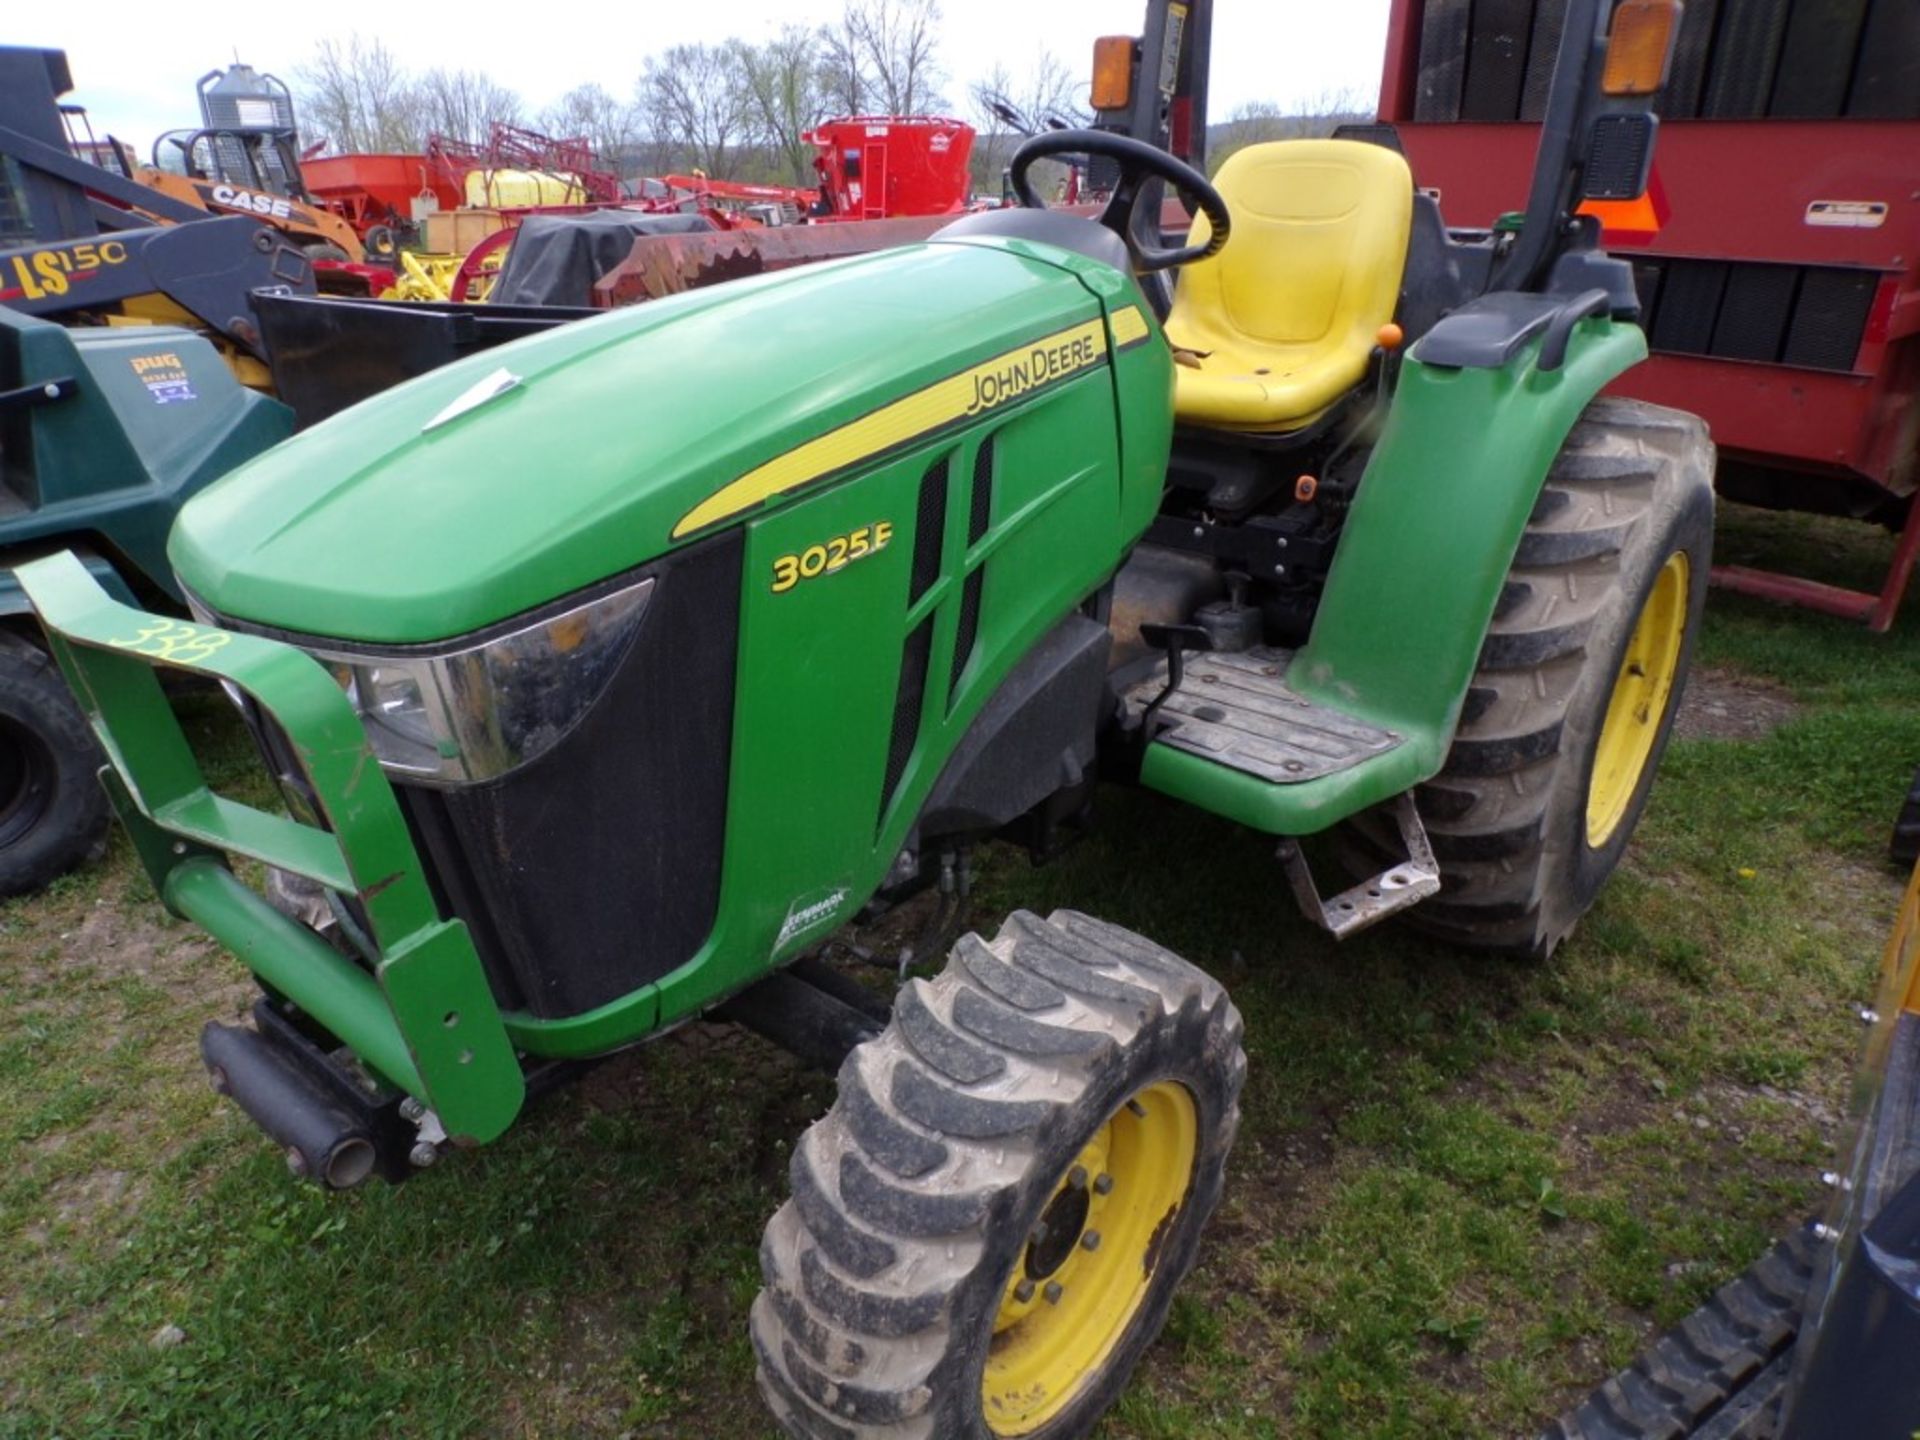 John Deere 3025E, 4 WD Compact, Dsl. Hydro, 3 PT PTO, 4730 Hours, ROPS (5414) - Image 2 of 4